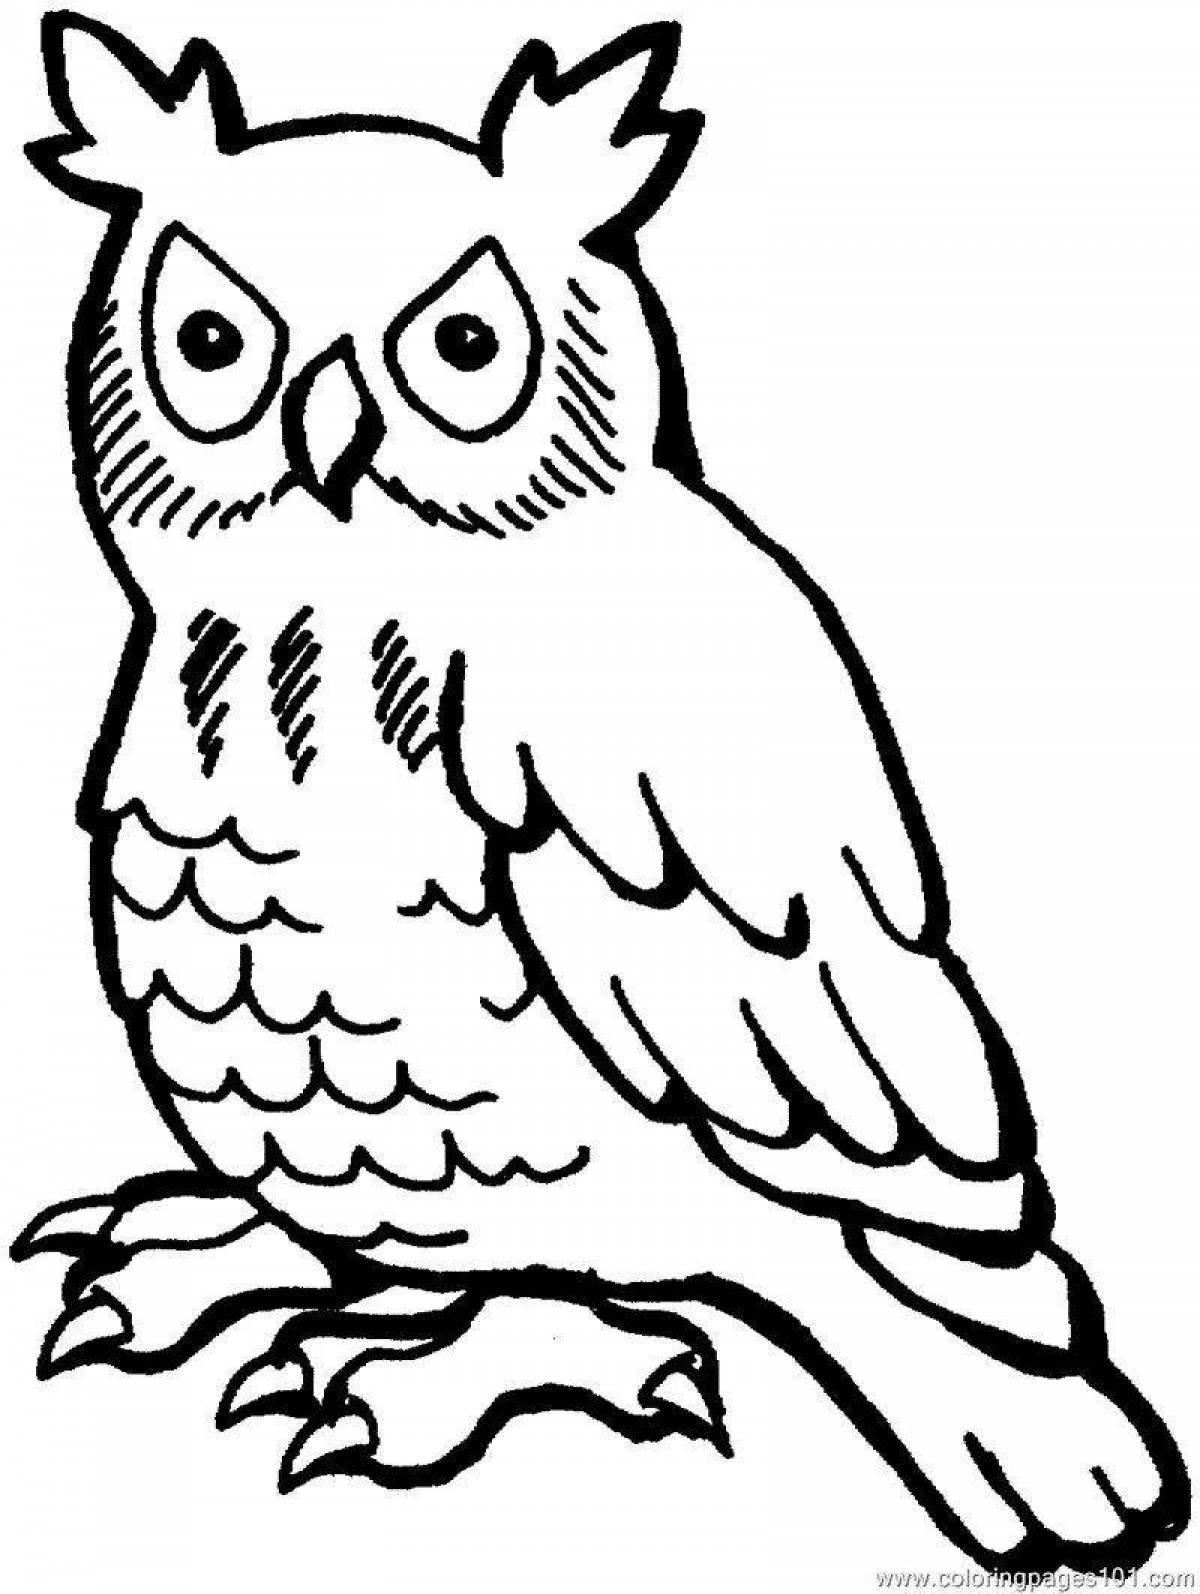 Majestic owl coloring page